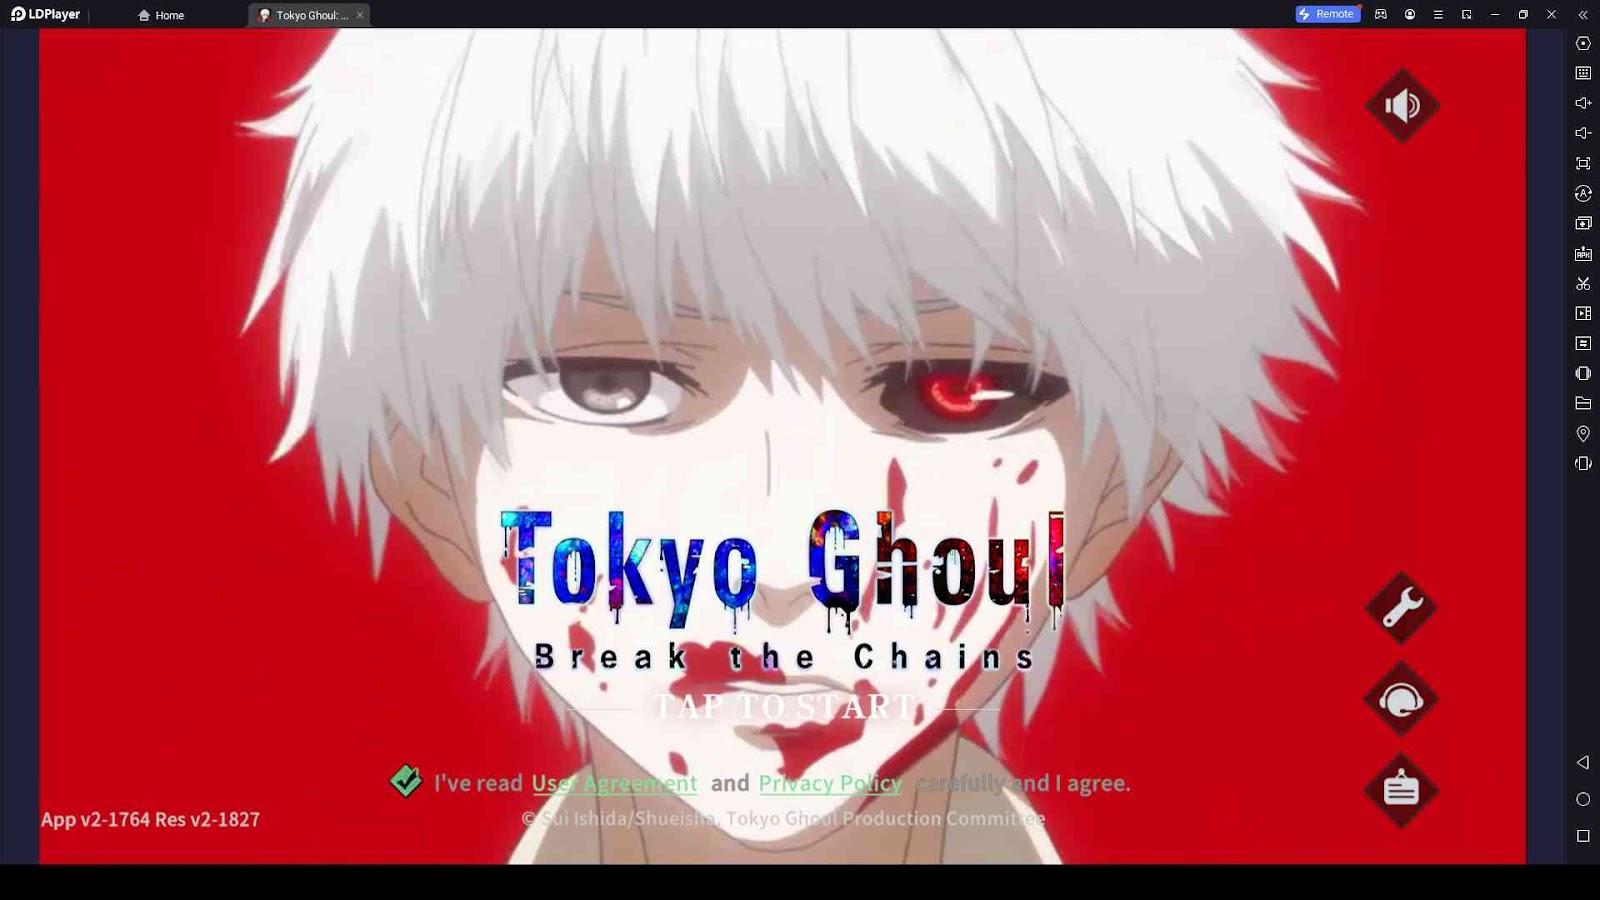 Ultimate Beginner Guide on Tokyo Ghoul: Break The Chains